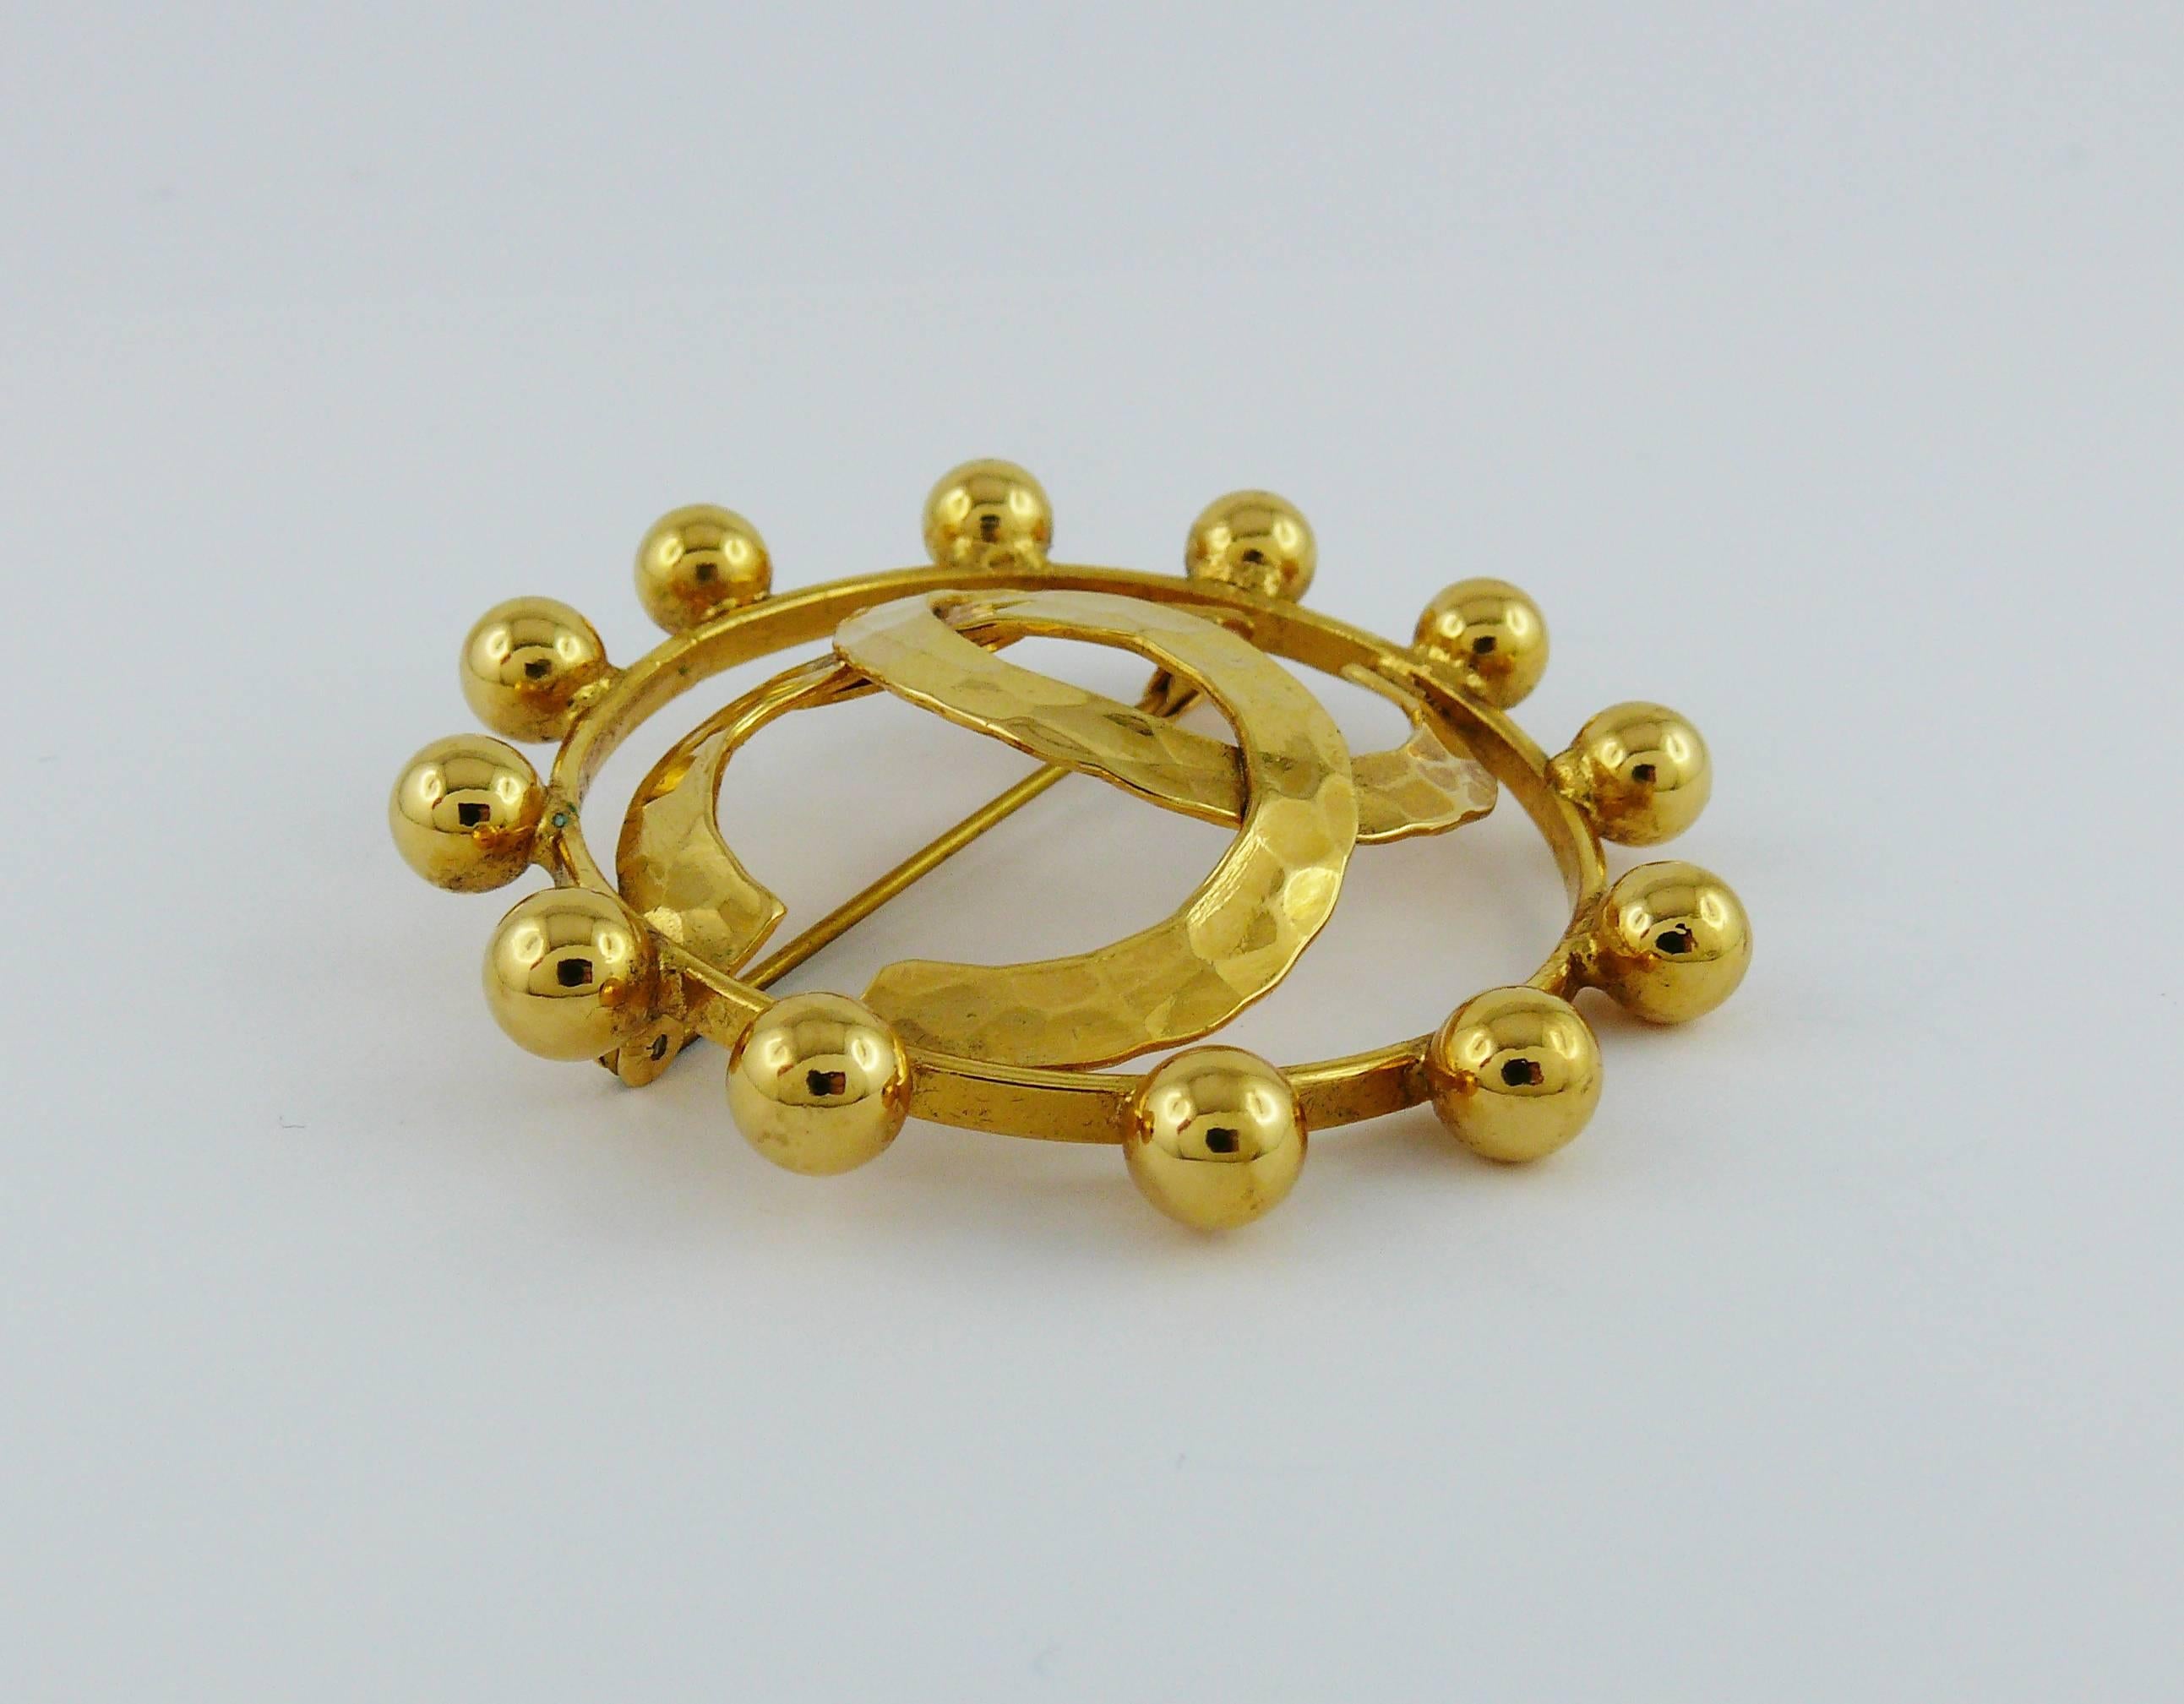 CHANEL vintage massive gold toned brooch featuring a large hammered CC monogram at center surrounded by a ring embellished with balls.

Marked CHANEL 2 5 Made in France.
Collection year 1990.

Indicative measurements : diameter approx. 4.7 cm (1.85